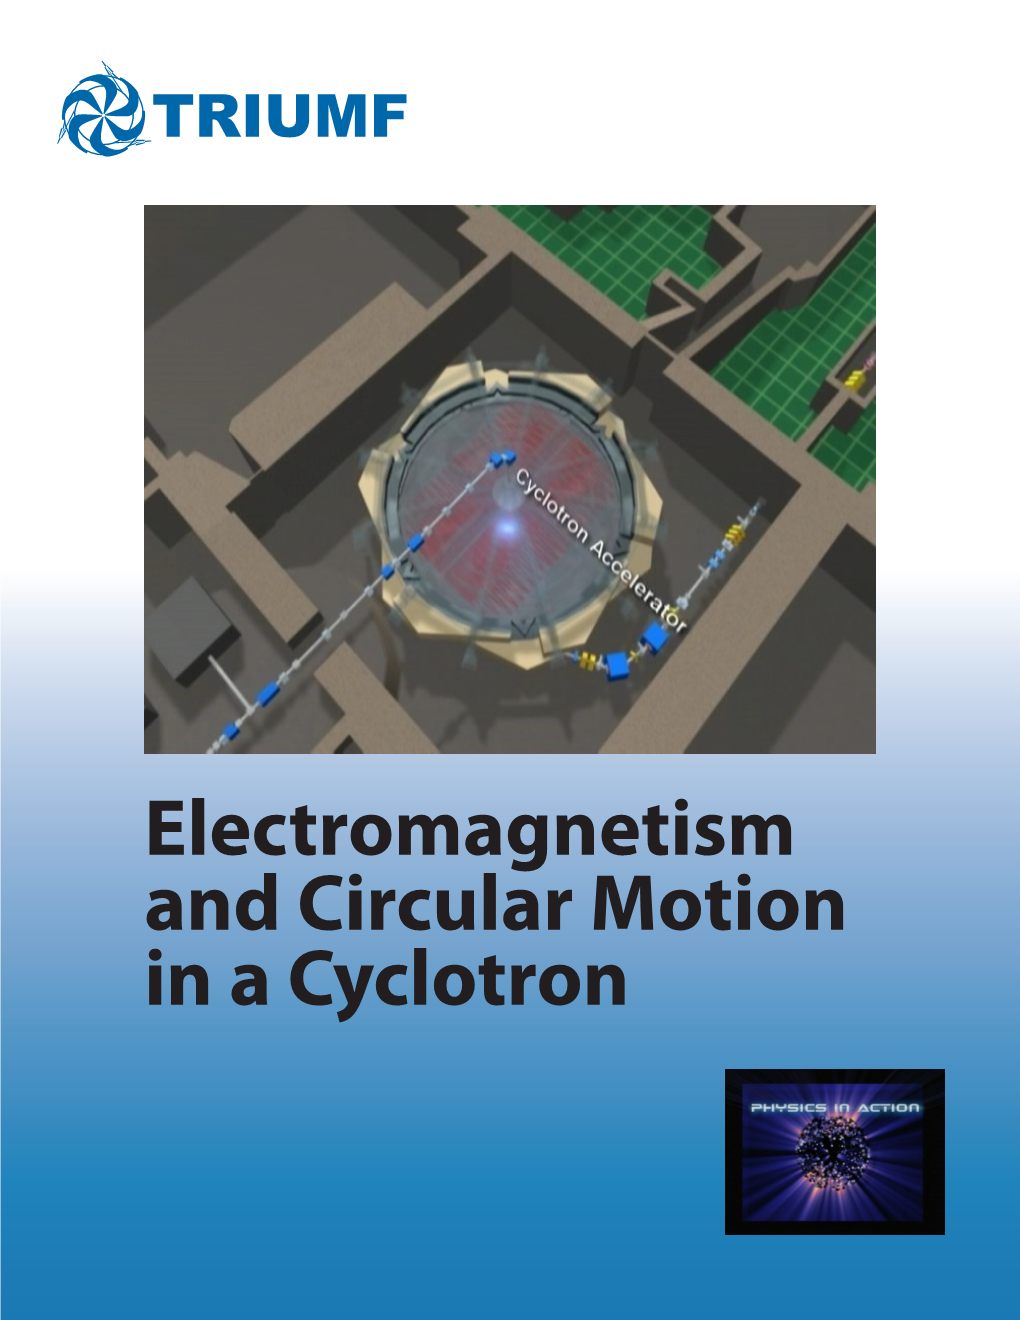 Electromagnetism and Circular Motion in a Cyclotron Contents